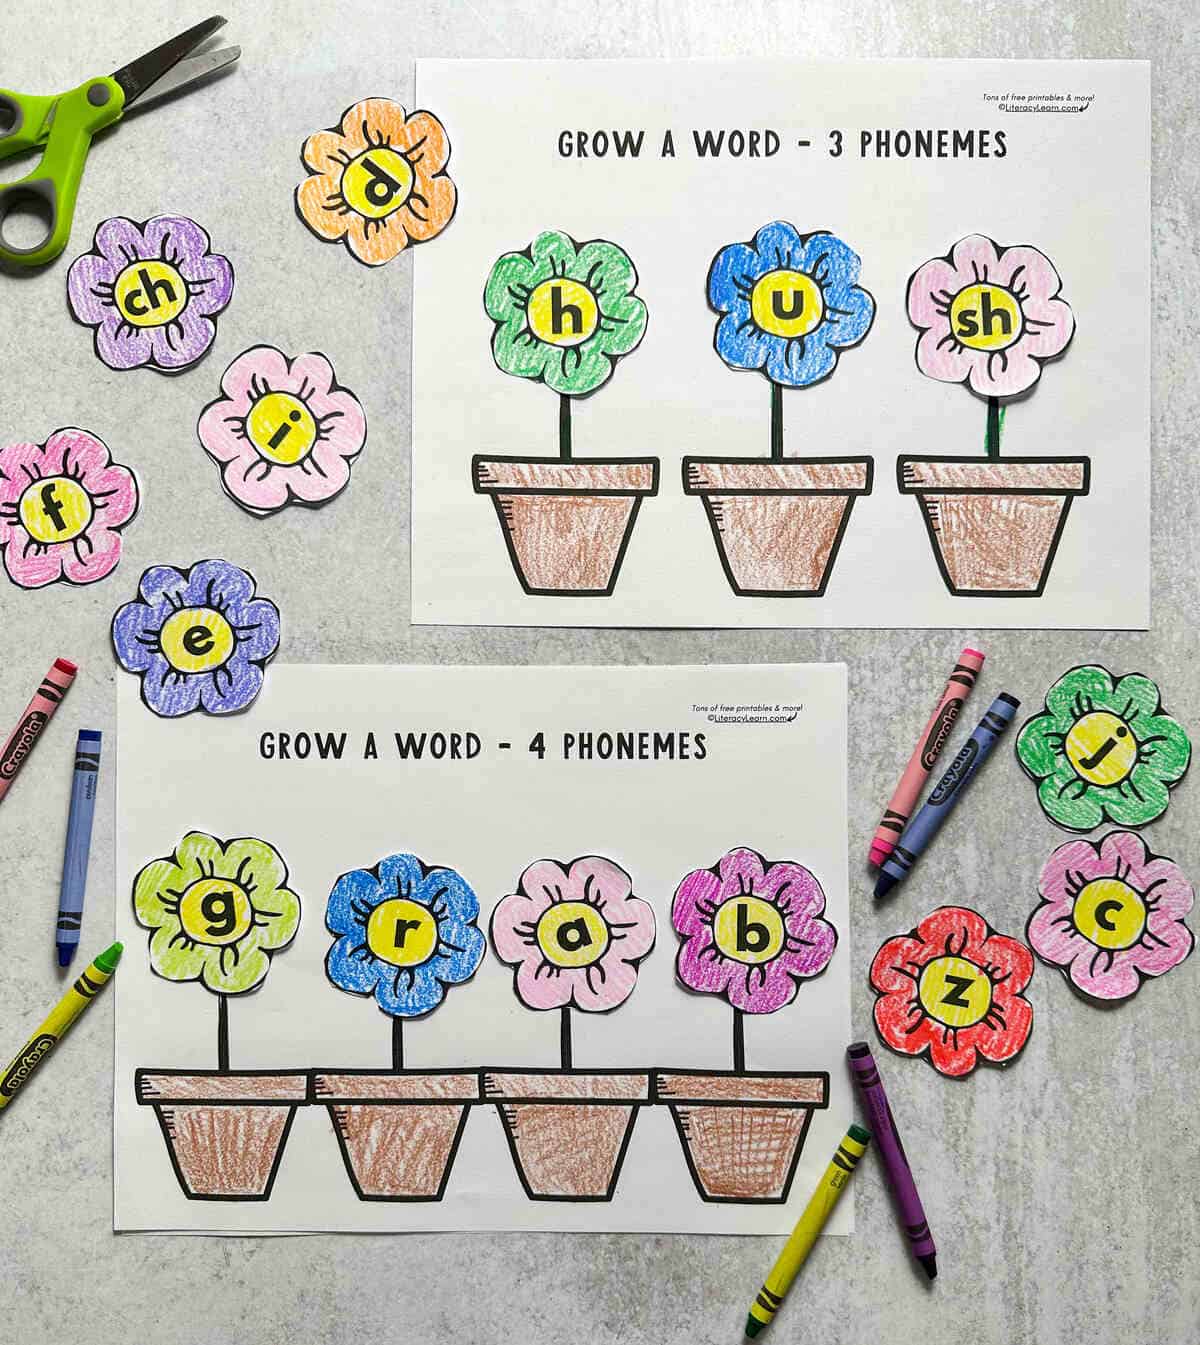 The 3 and 4 phoneme word building printables with lots of colorful letter flowers.